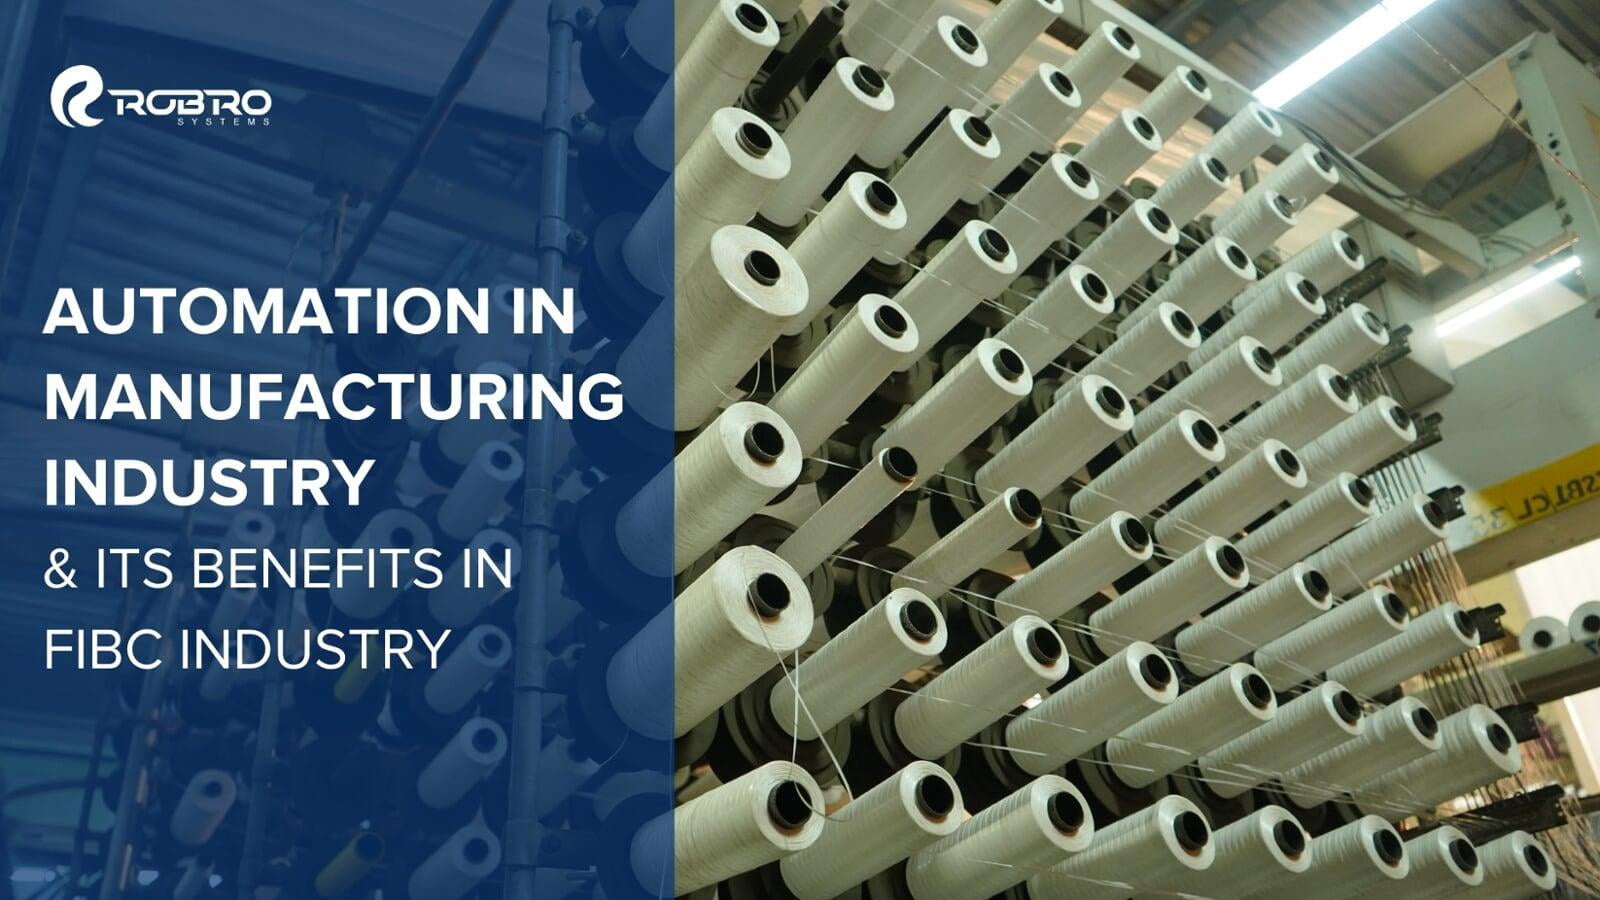 Automation in Manufacturing Industry and its benefits in FIBC Industry